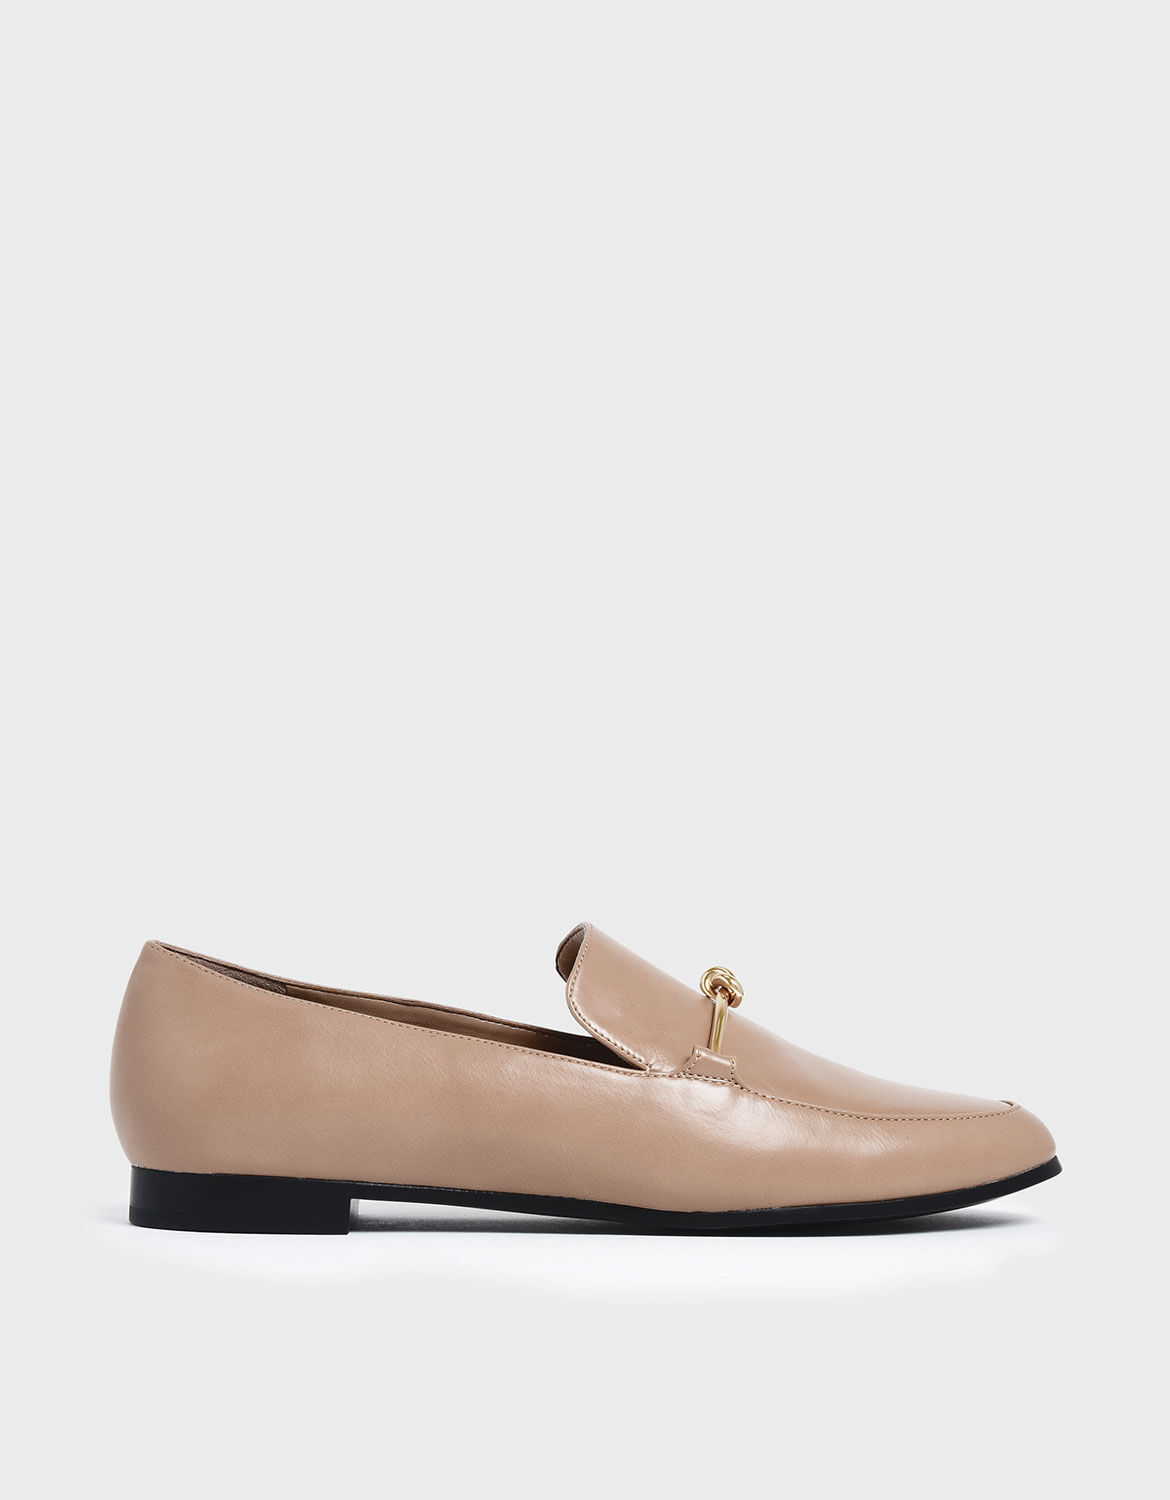 Nude Metallic Knot Accent Loafers 